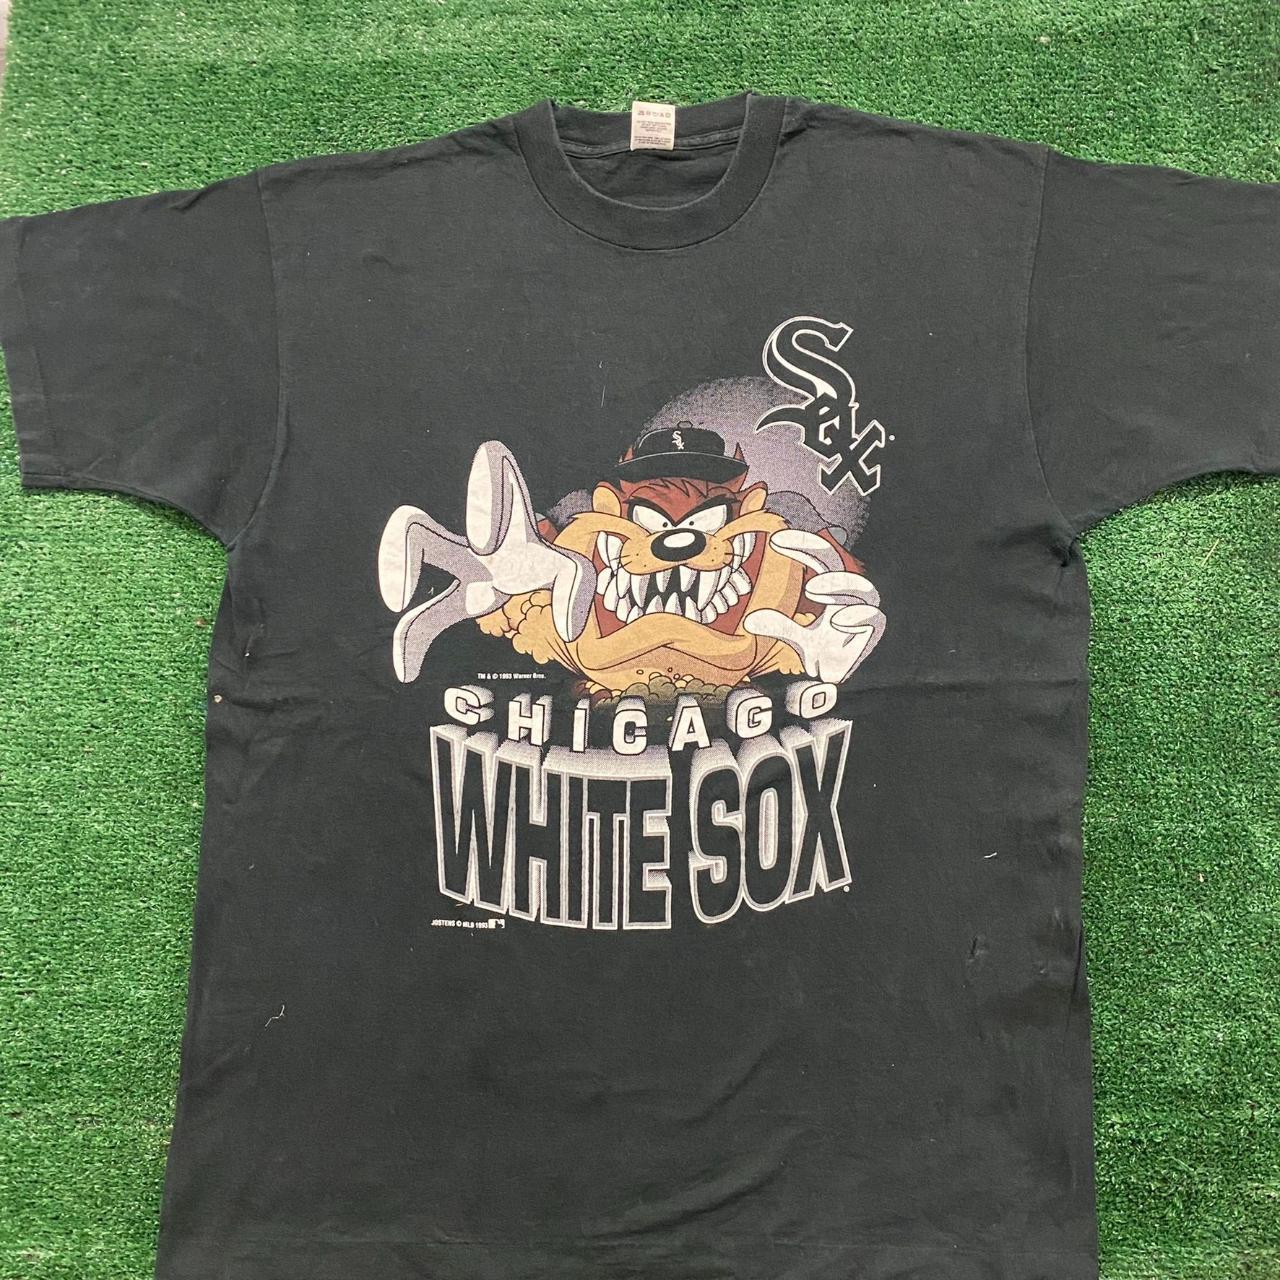 Chicago White Sox Baseball Vintage Sports Shirts for sale